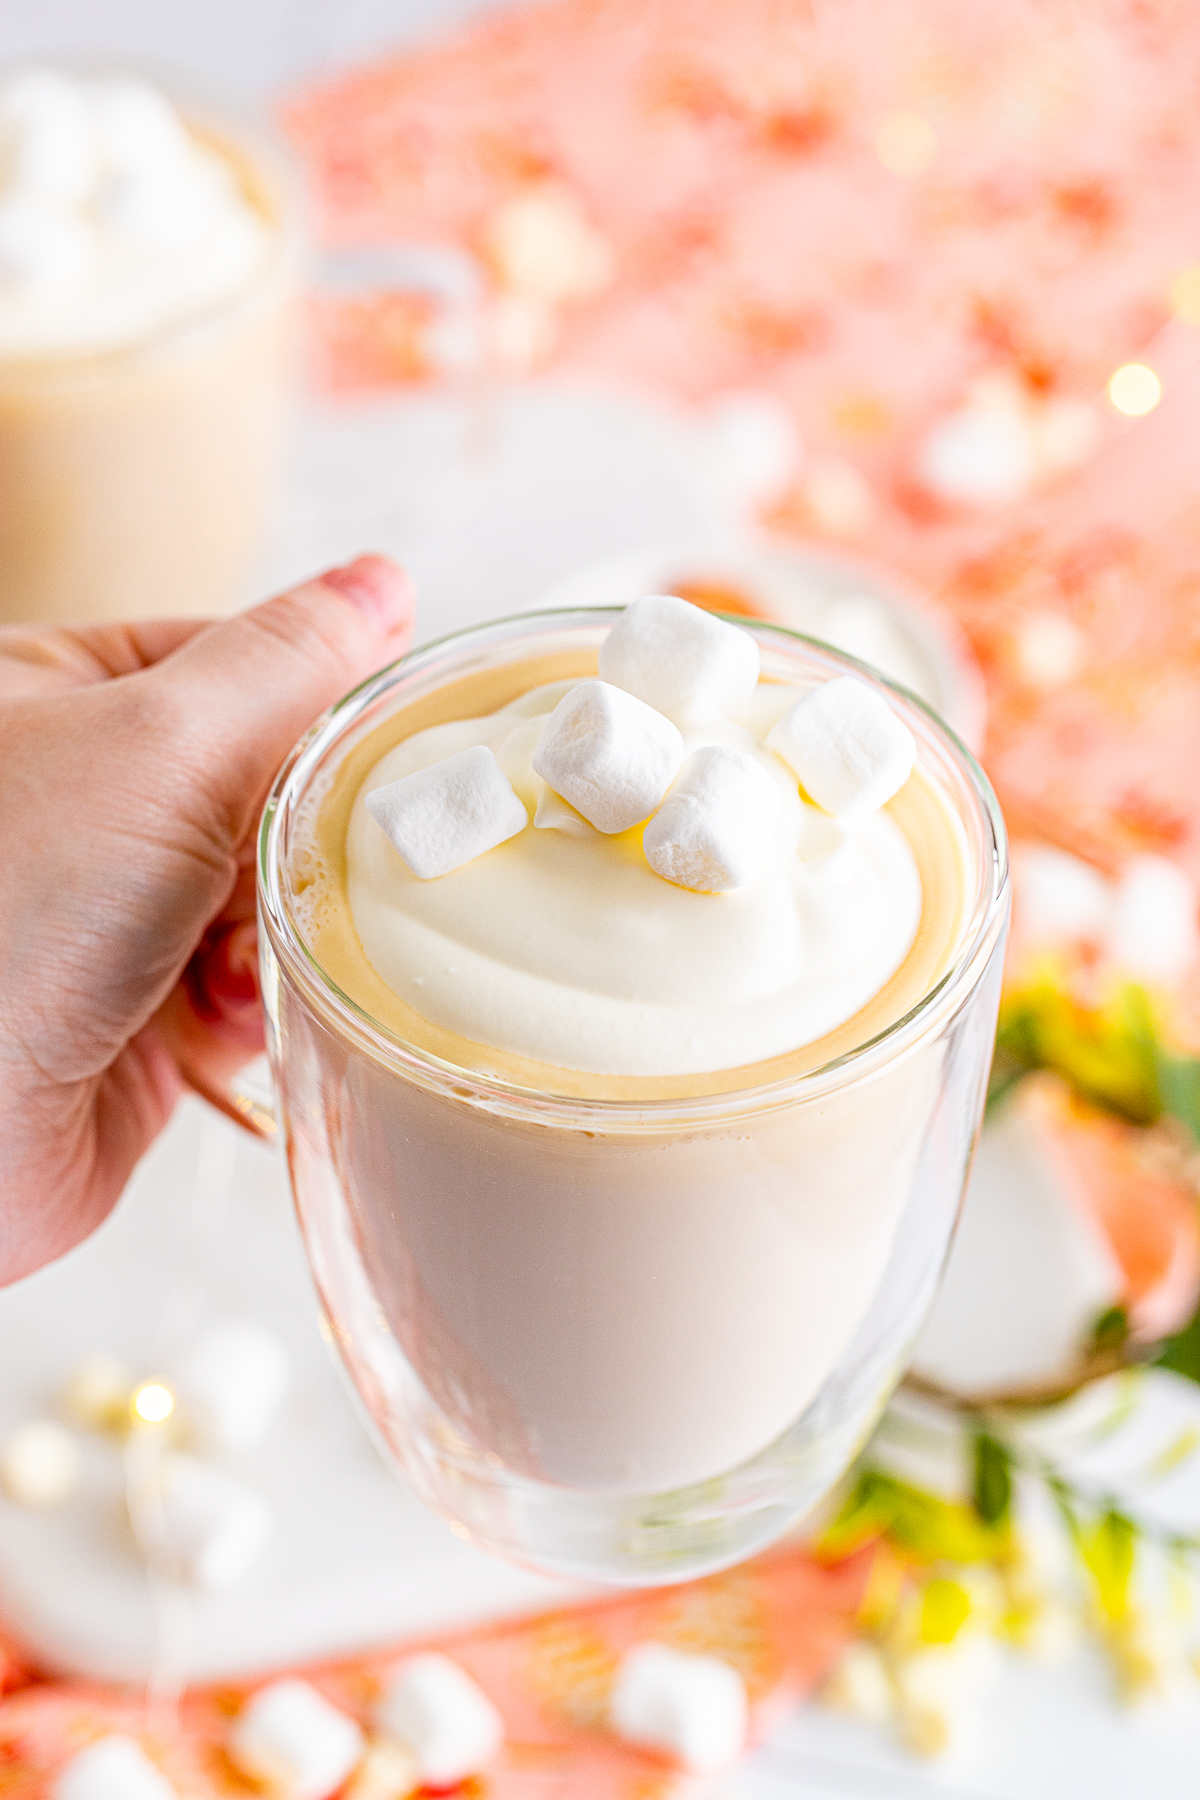 Hand holding up mug of Boozy White Hot Chocolate Recipe topped with whipped cream and marshmallows.